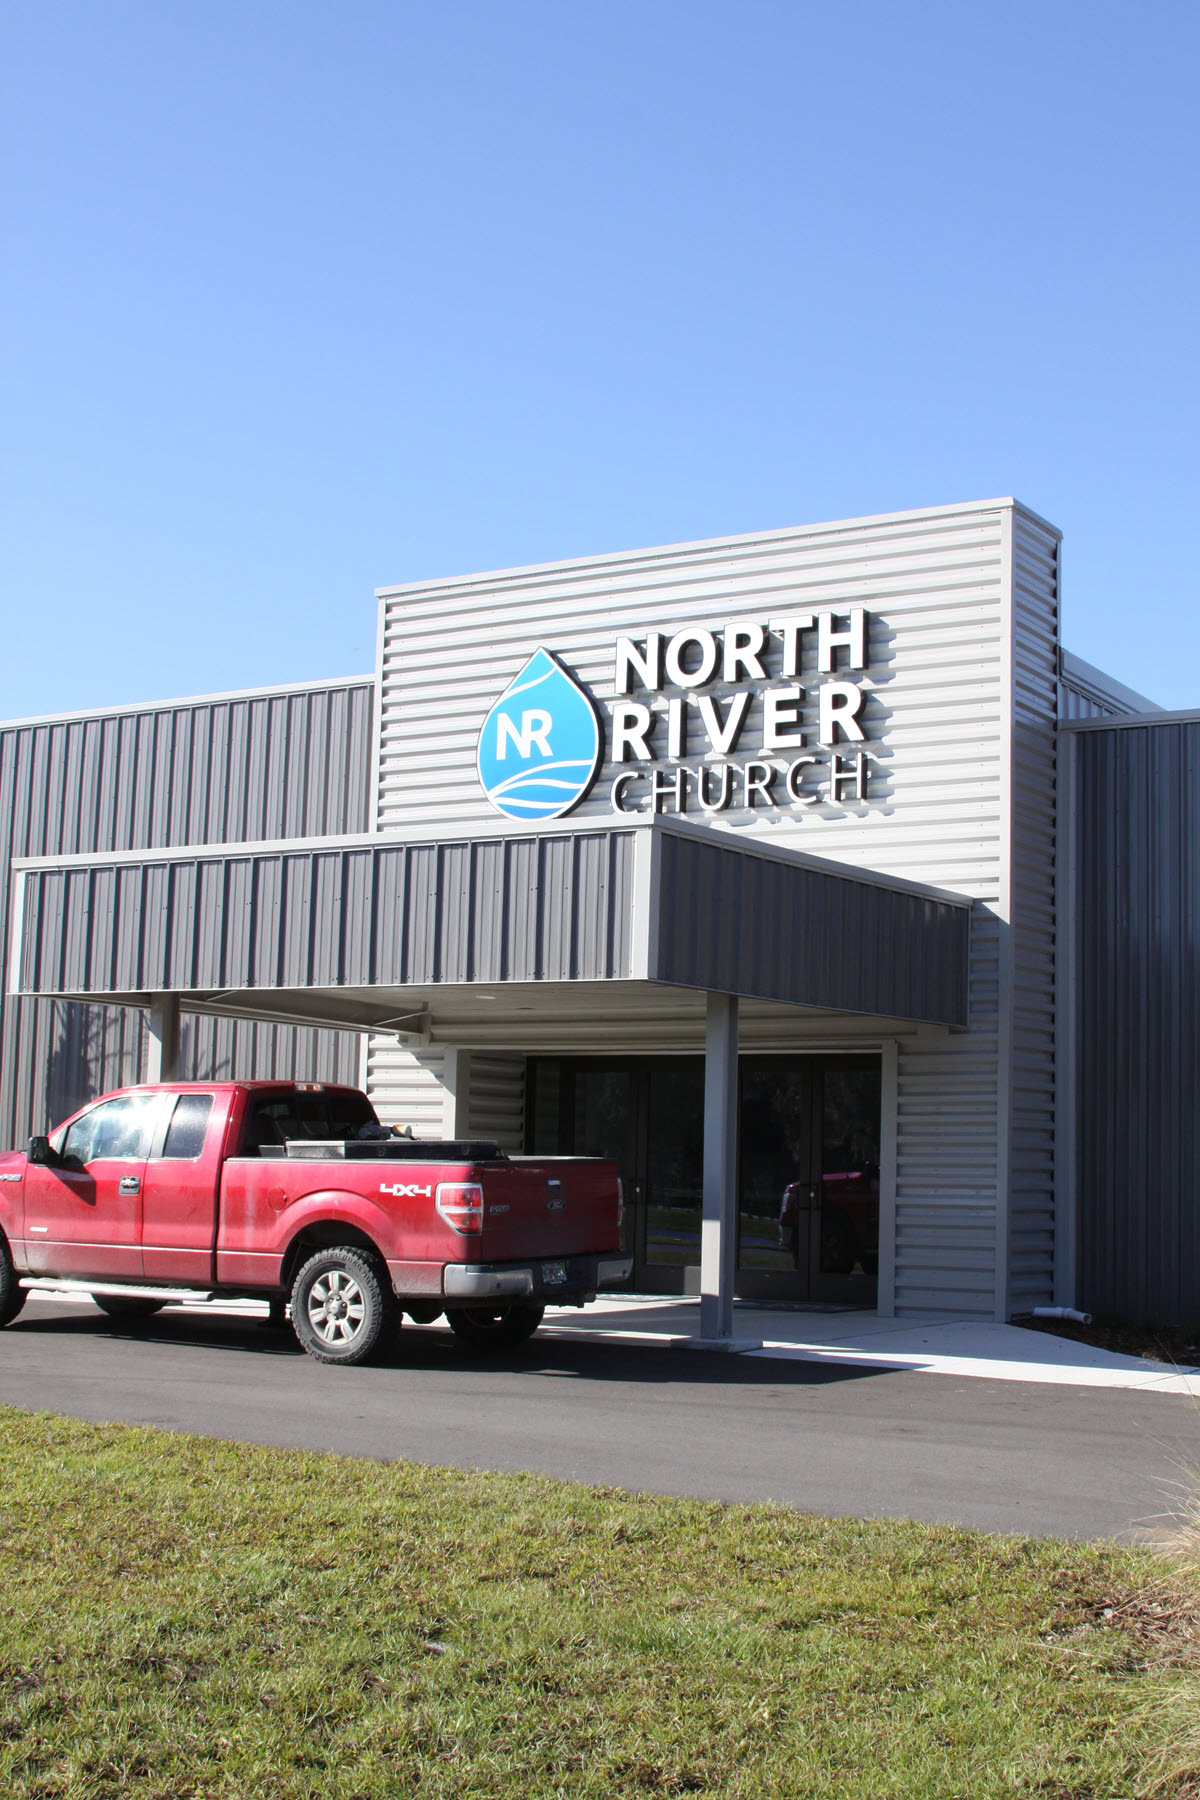 North River Church Channel Letter Wall Sign